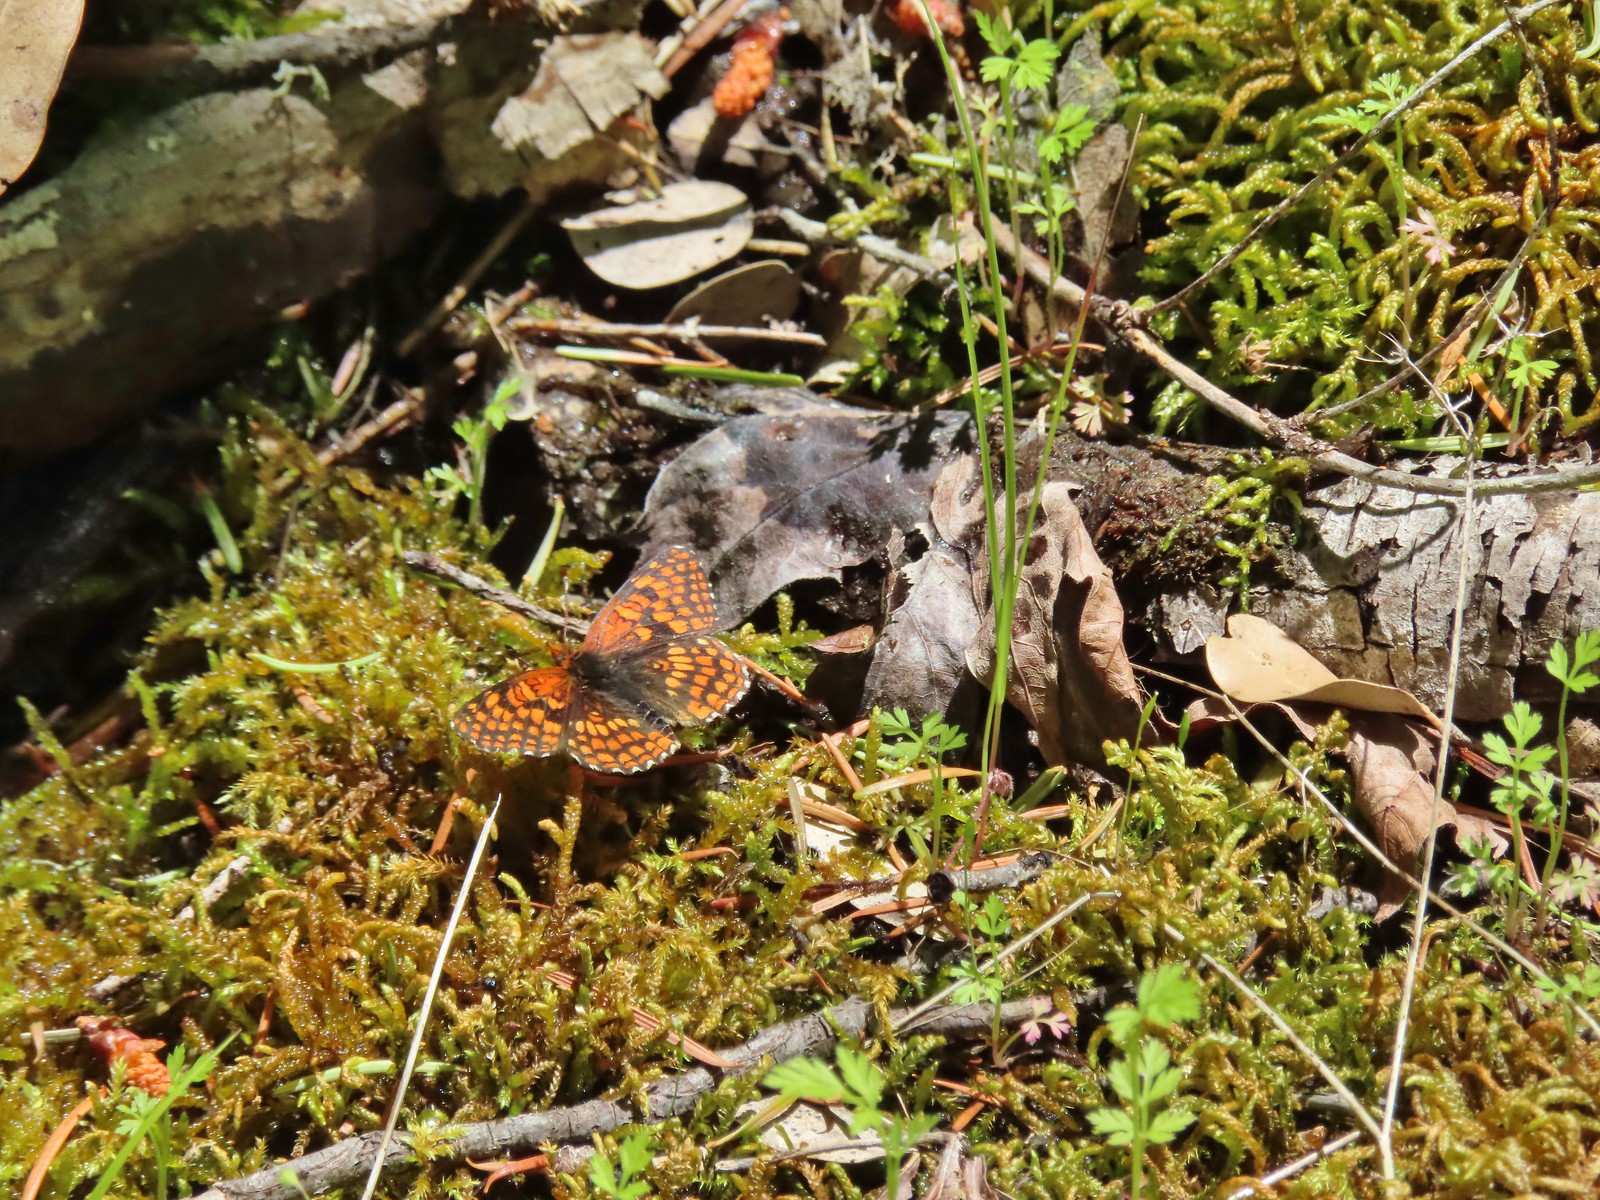 Possibly a northern checkerspot